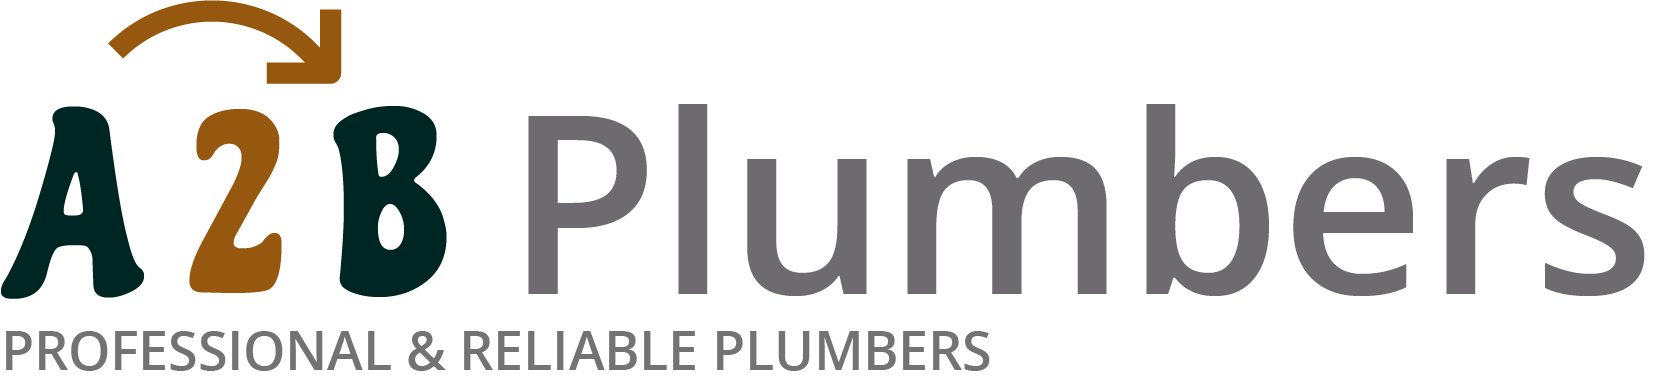 If you need a boiler installed, a radiator repaired or a leaking tap fixed, call us now - we provide services for properties in Newbury Park and the local area.